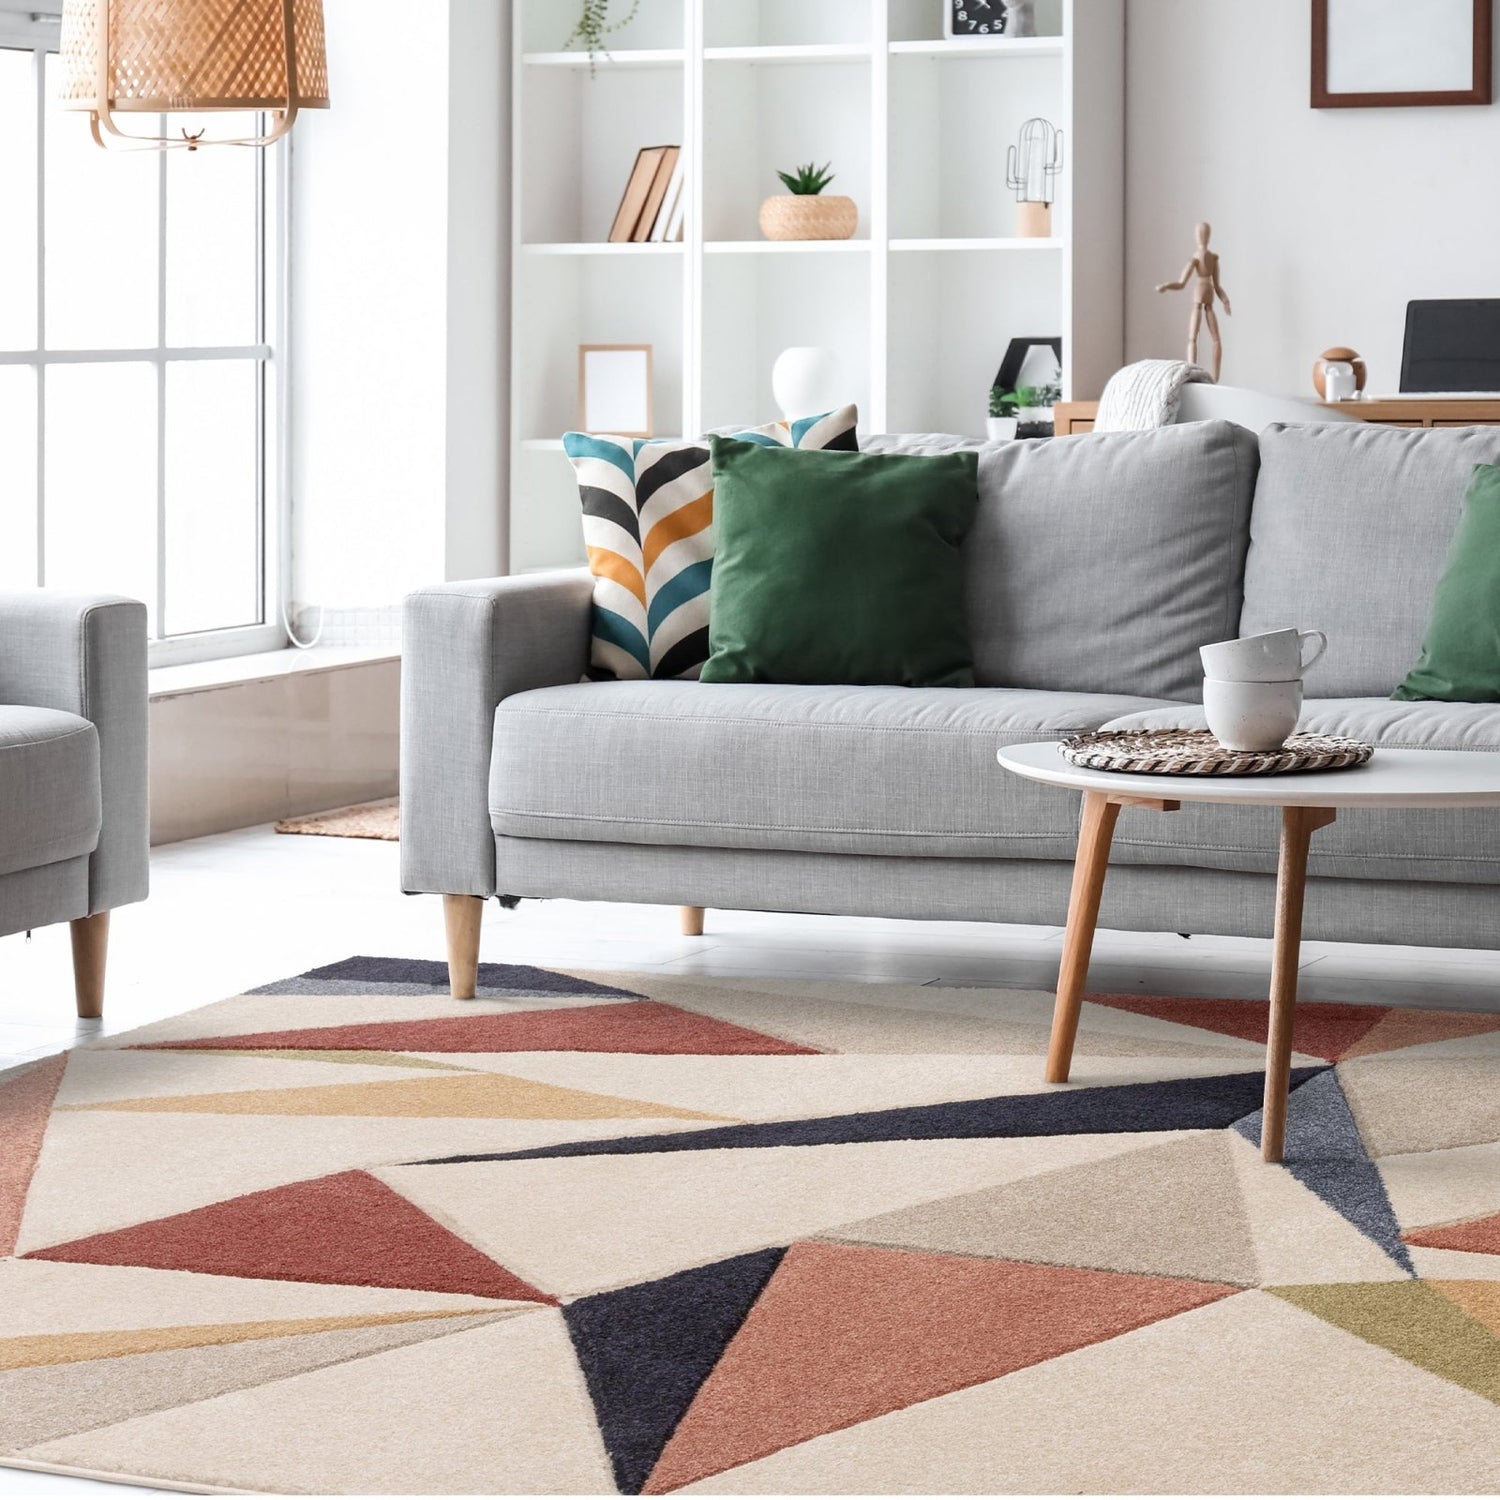 Triangles Patterned Rugs